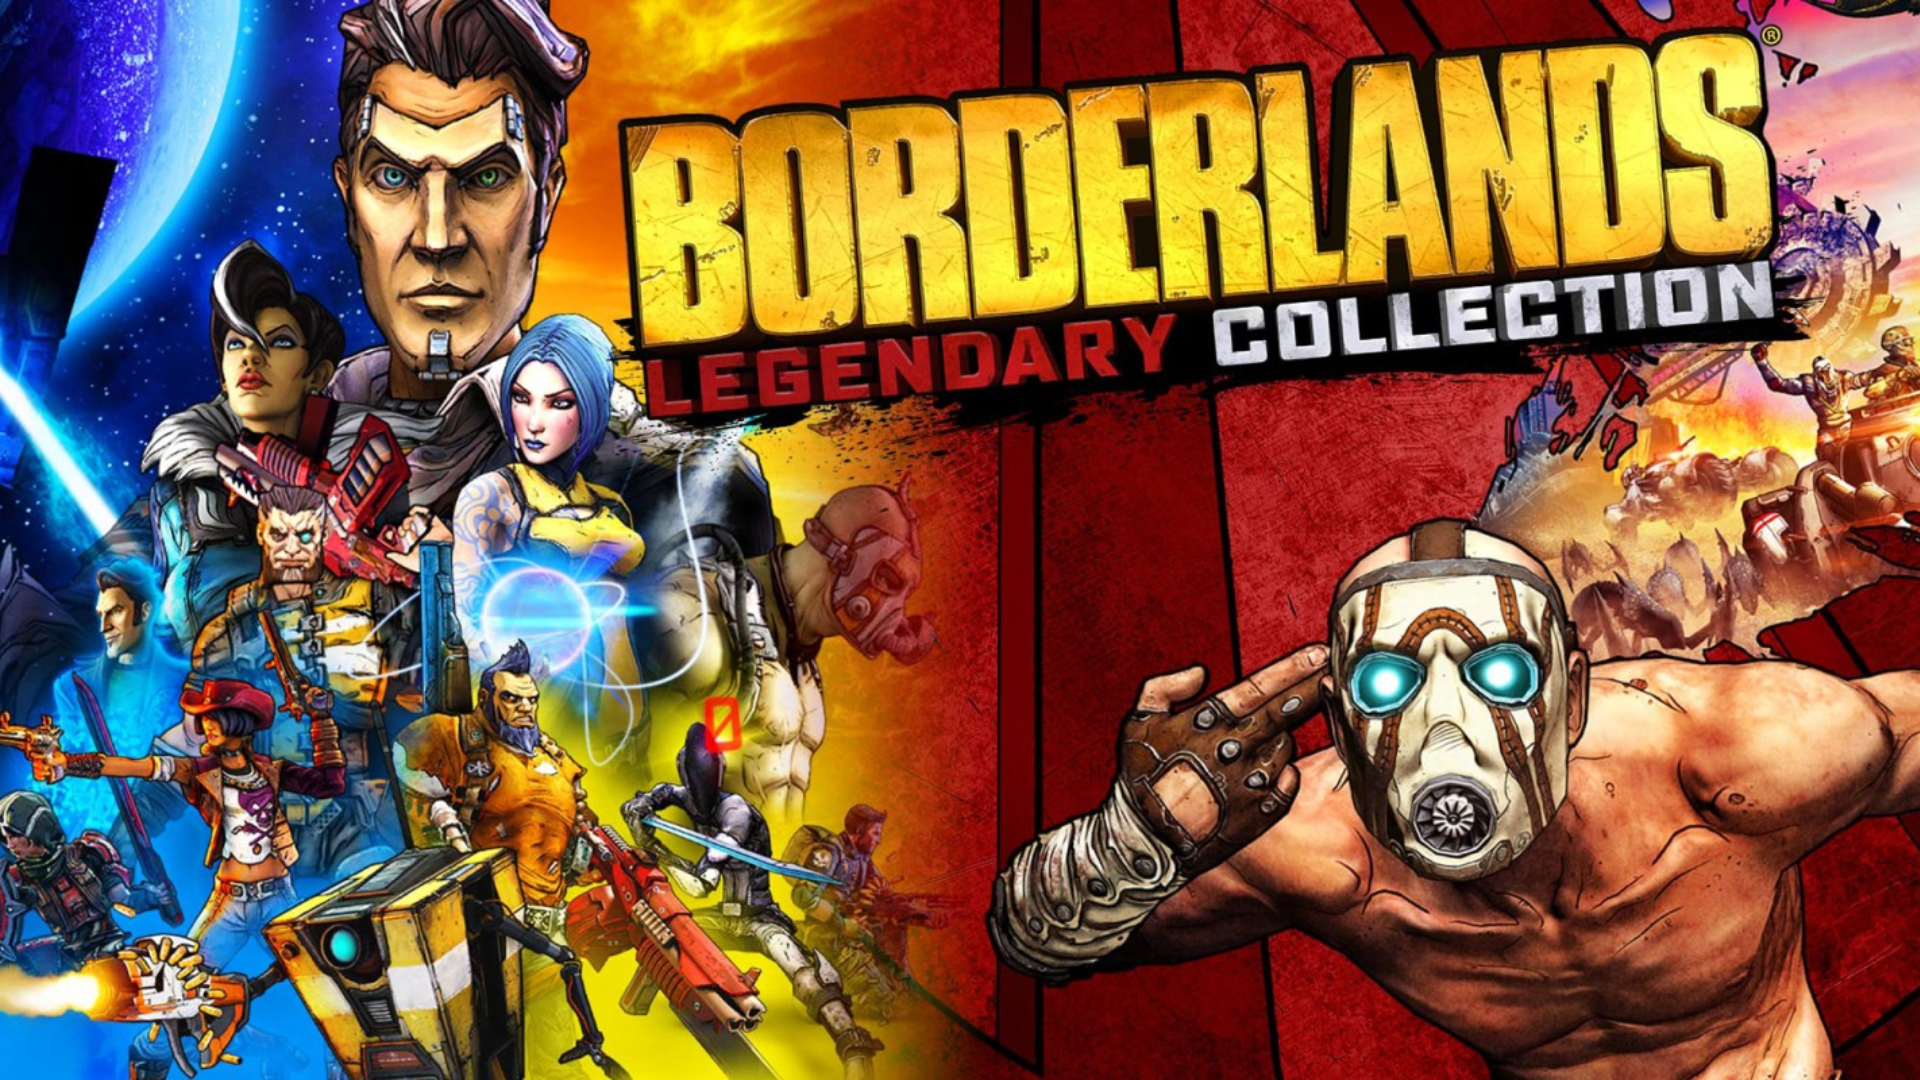 Borderlands Legacy Collection key art featuring a range of characters